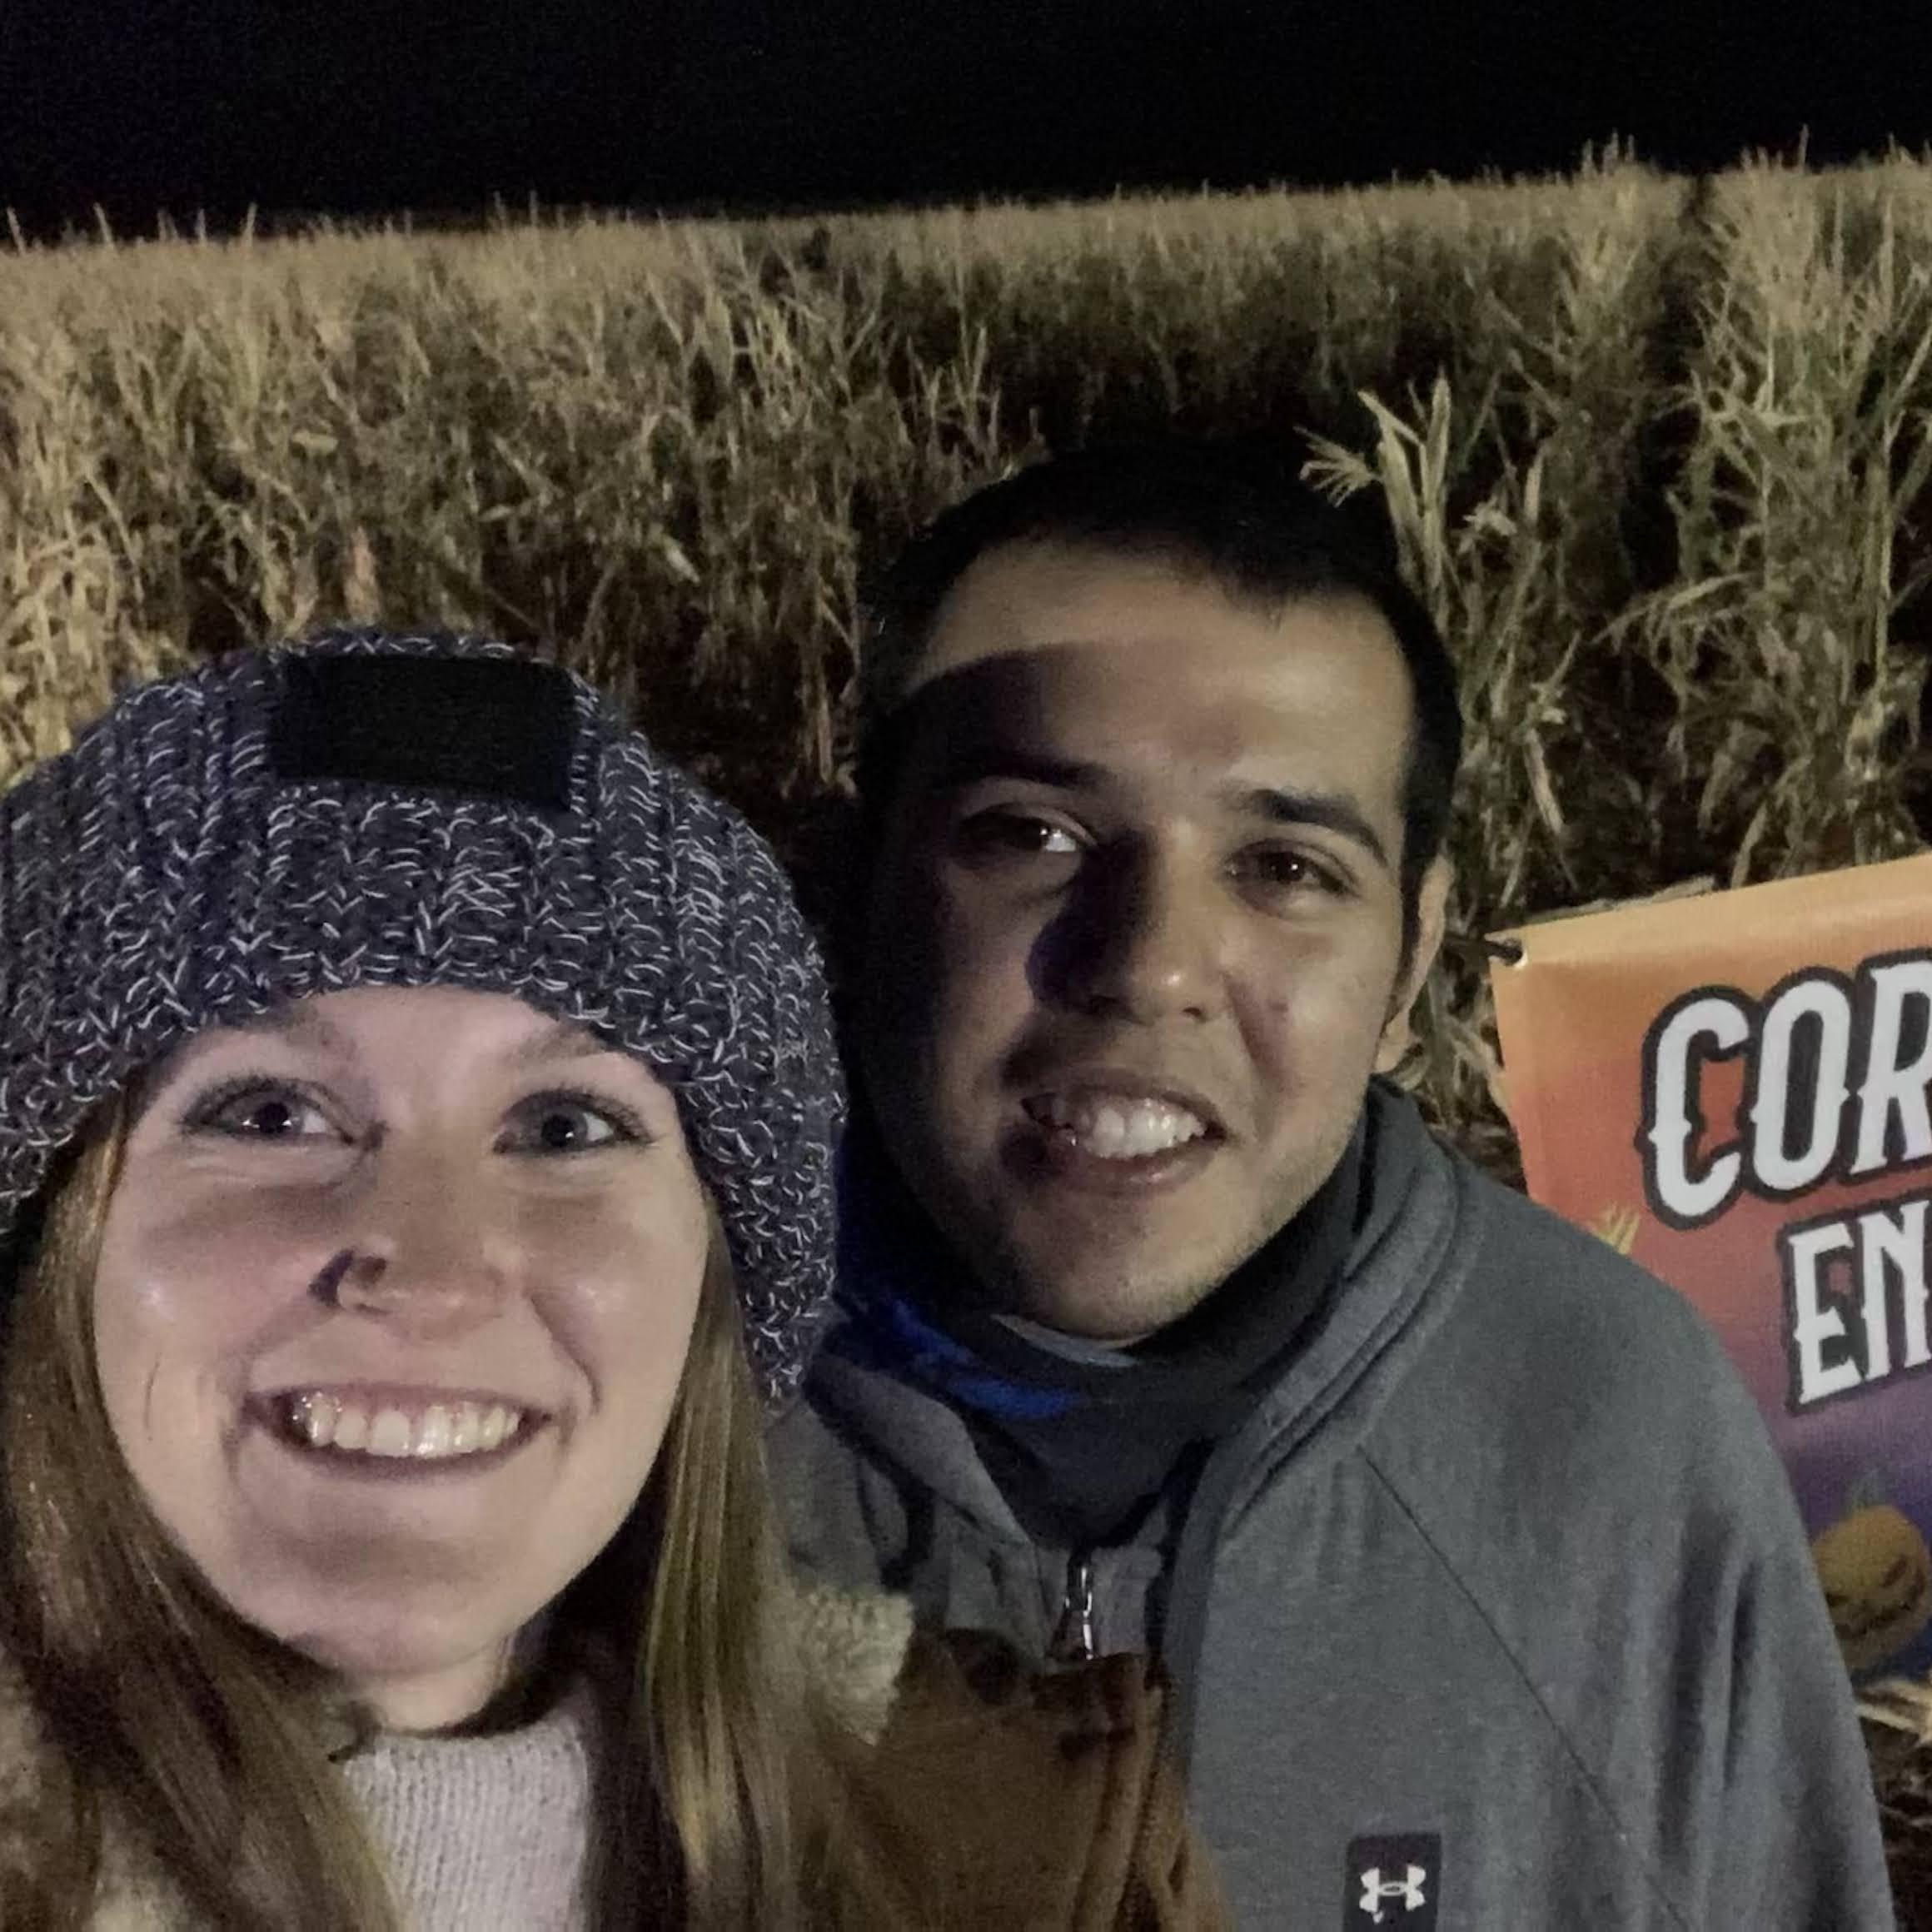 We were taller than the corn in the corn maze lol